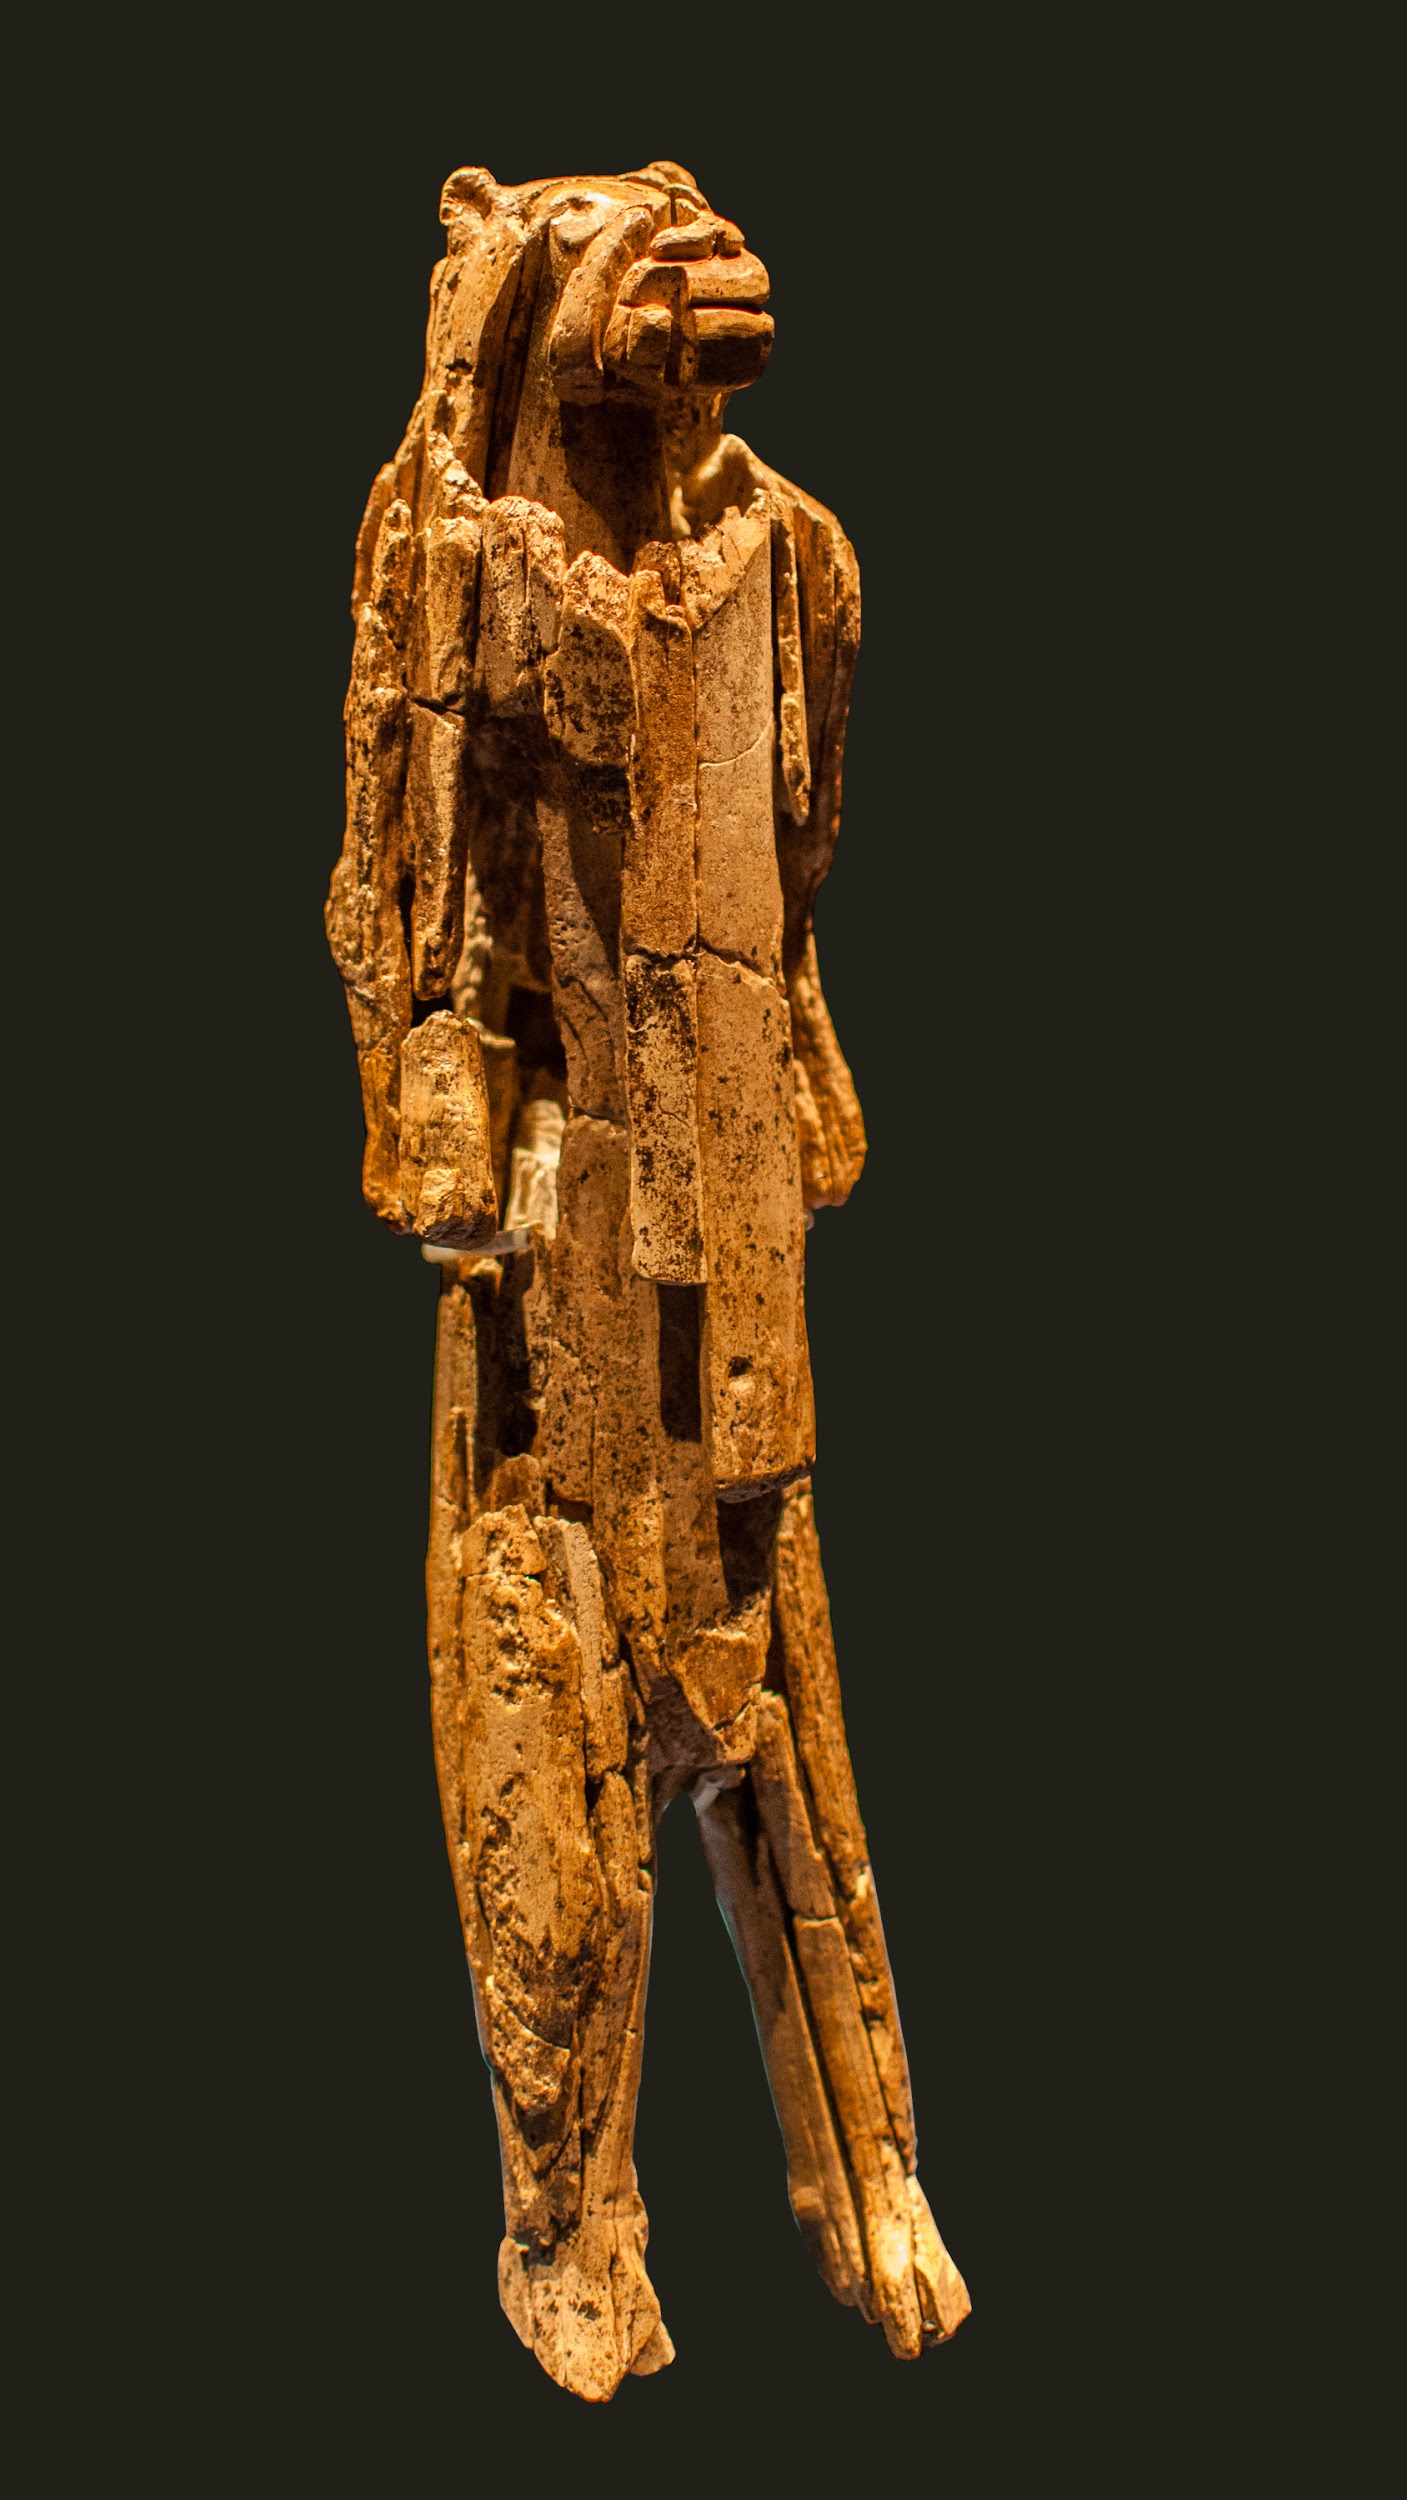 A brown standing statue of a human figure with cat’s head.